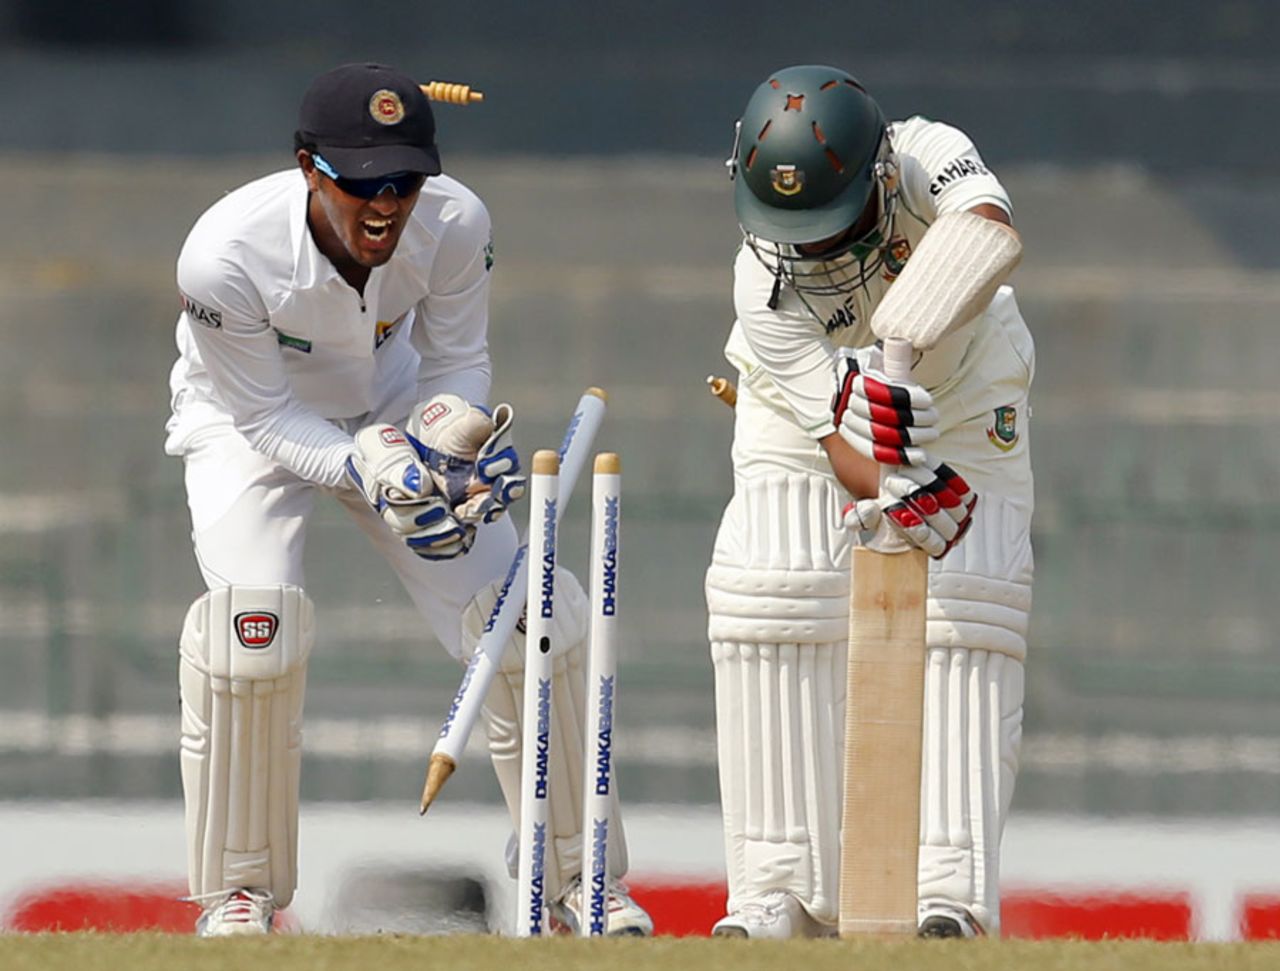 Mohammad Ashraful was bowled for 4, Sri Lanka v Bangladesh, 2nd Test, 3rd day, Colombo, March 18, 2013